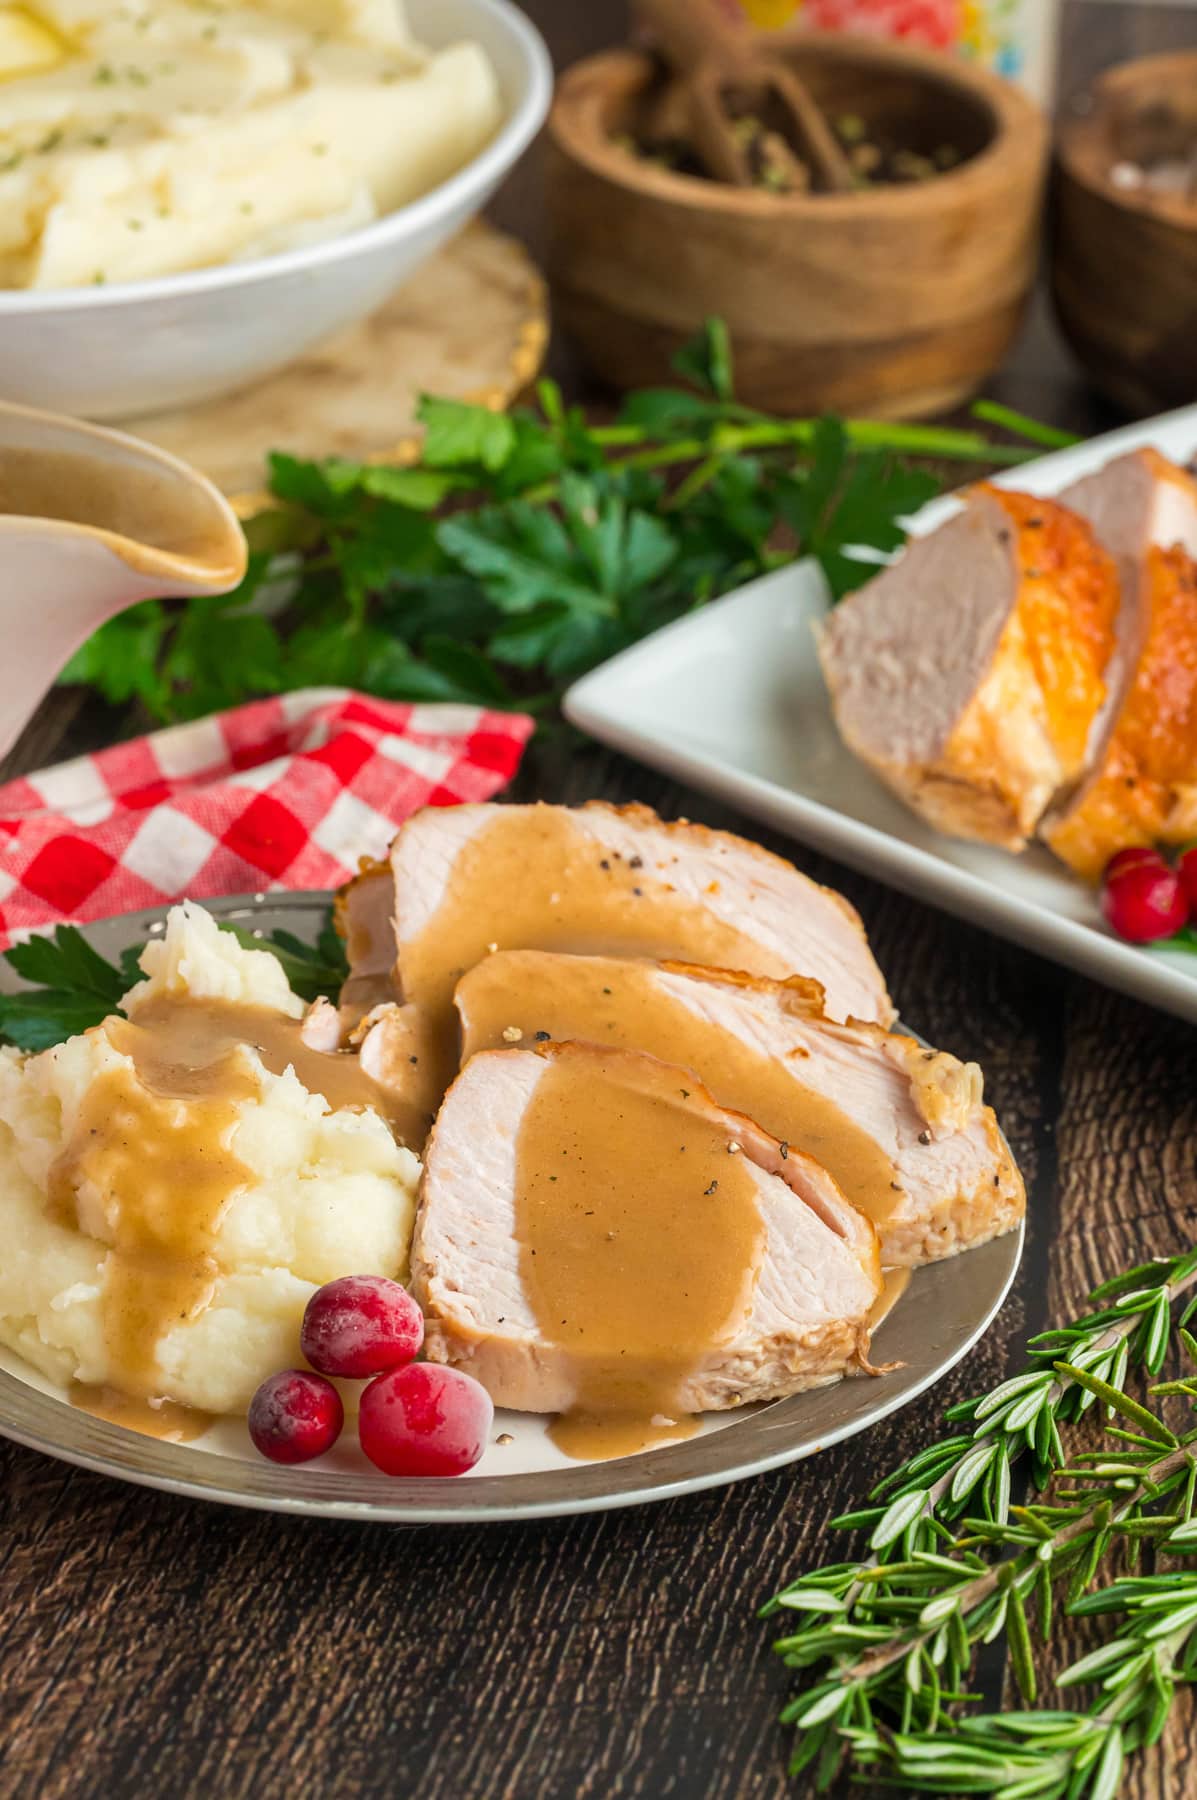 Gravy from drippings drizzled over slices of turkey and mashed potatoes